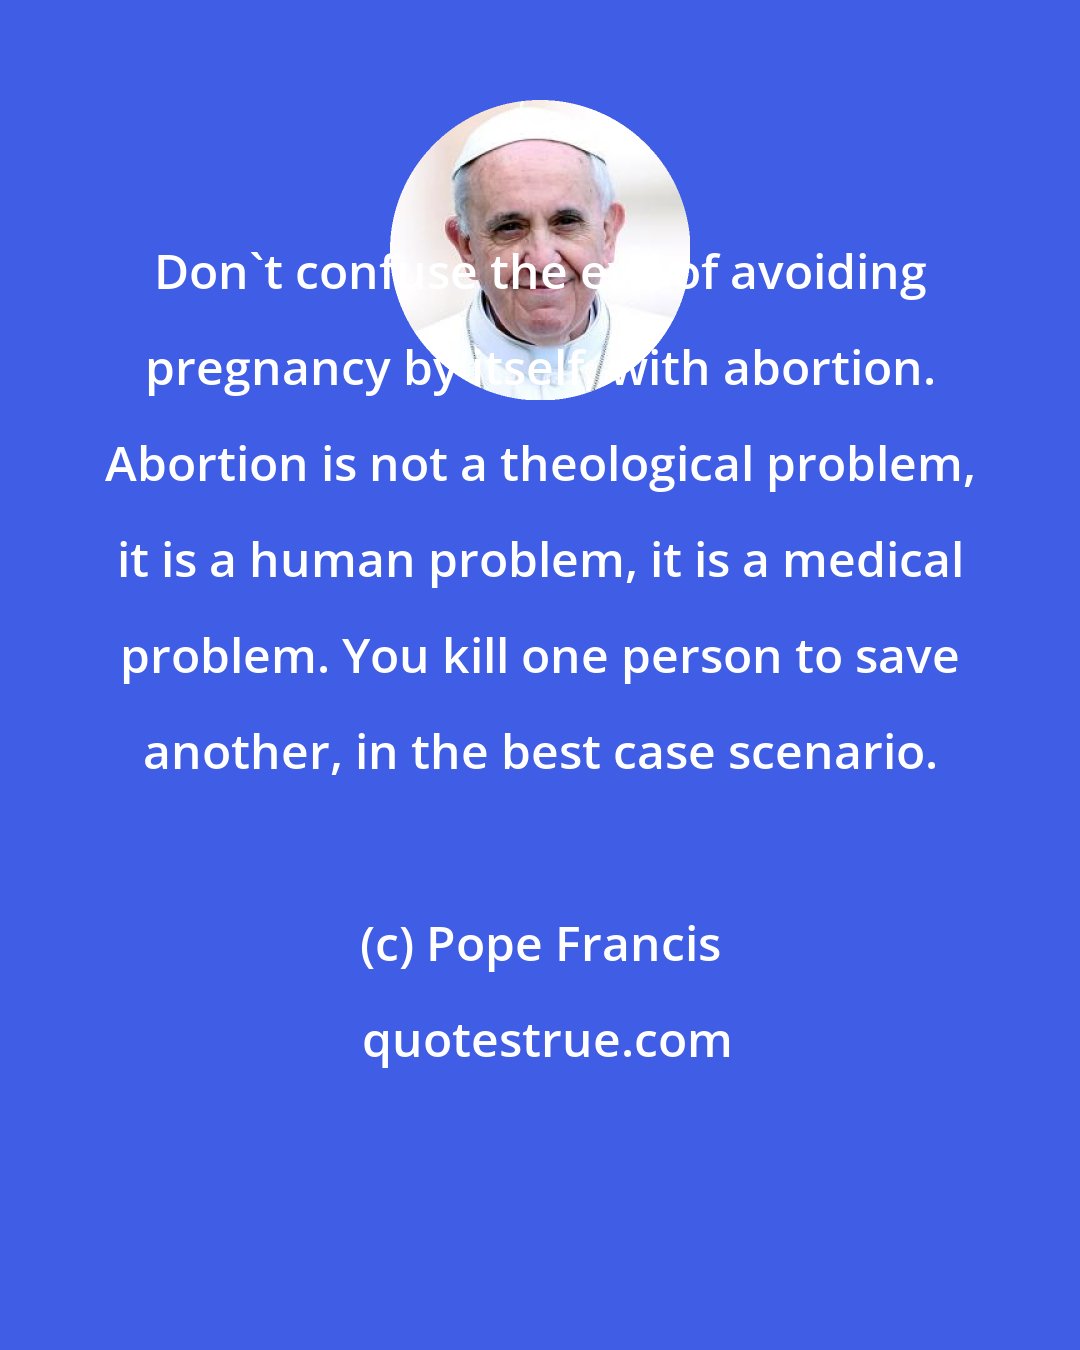 Pope Francis: Don't confuse the evil of avoiding pregnancy by itself, with abortion. Abortion is not a theological problem, it is a human problem, it is a medical problem. You kill one person to save another, in the best case scenario.